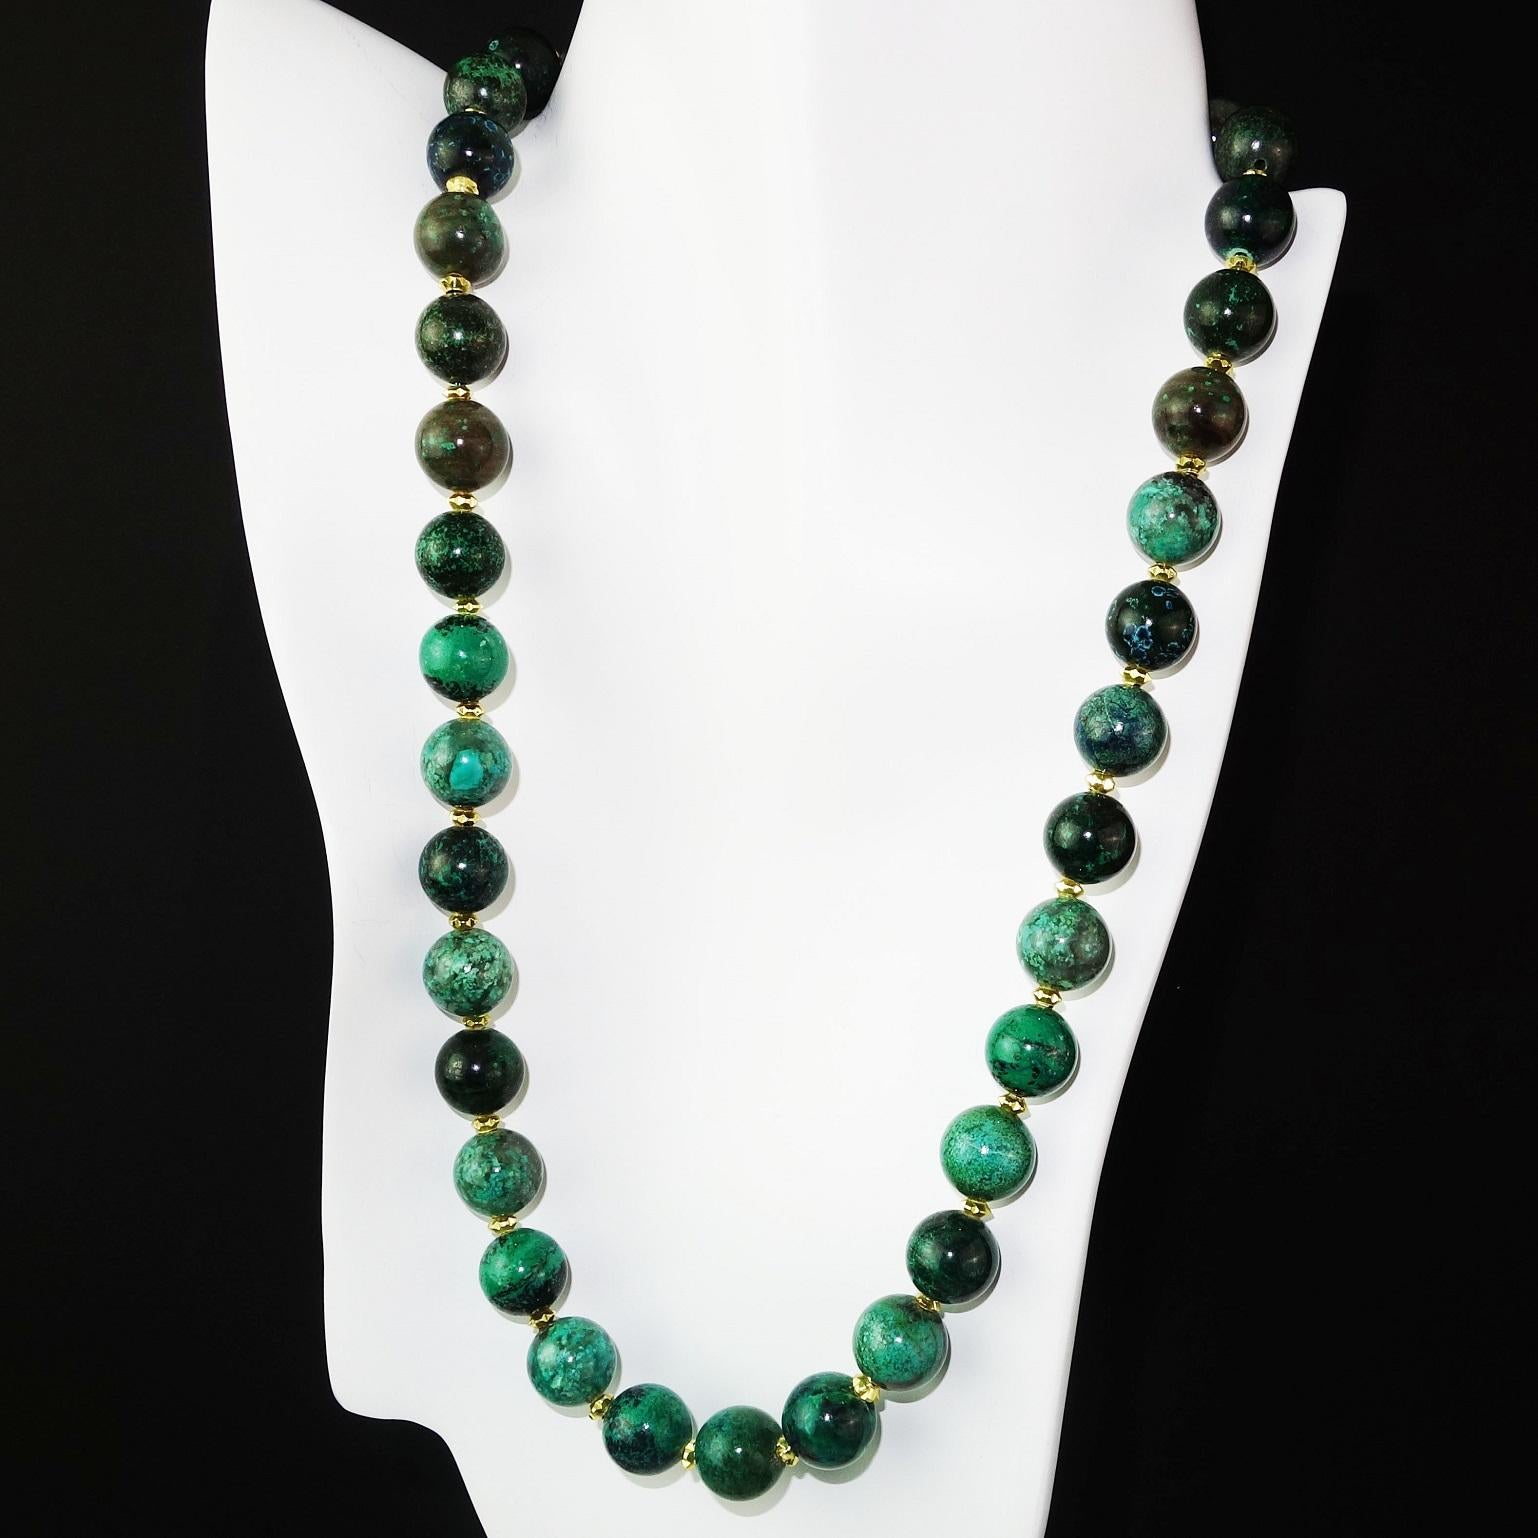 Artisan AJD Stunning Green Congolese Chrysocolla Necklace